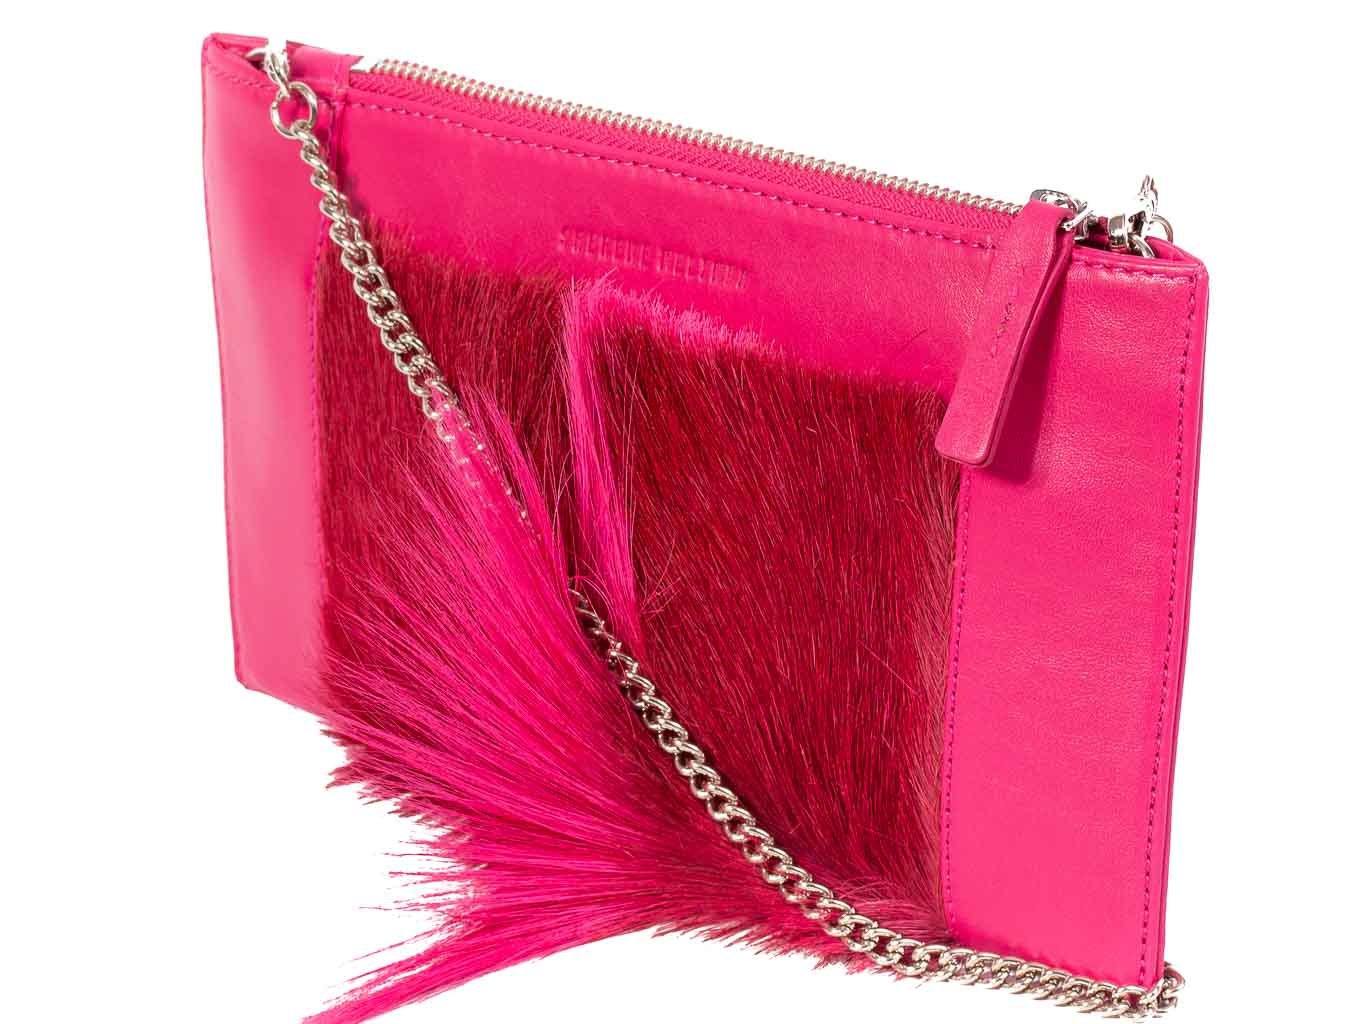 Clutch Springbok Handbag in Fuchsia with a fan feature by Sherene Melinda front angle strap